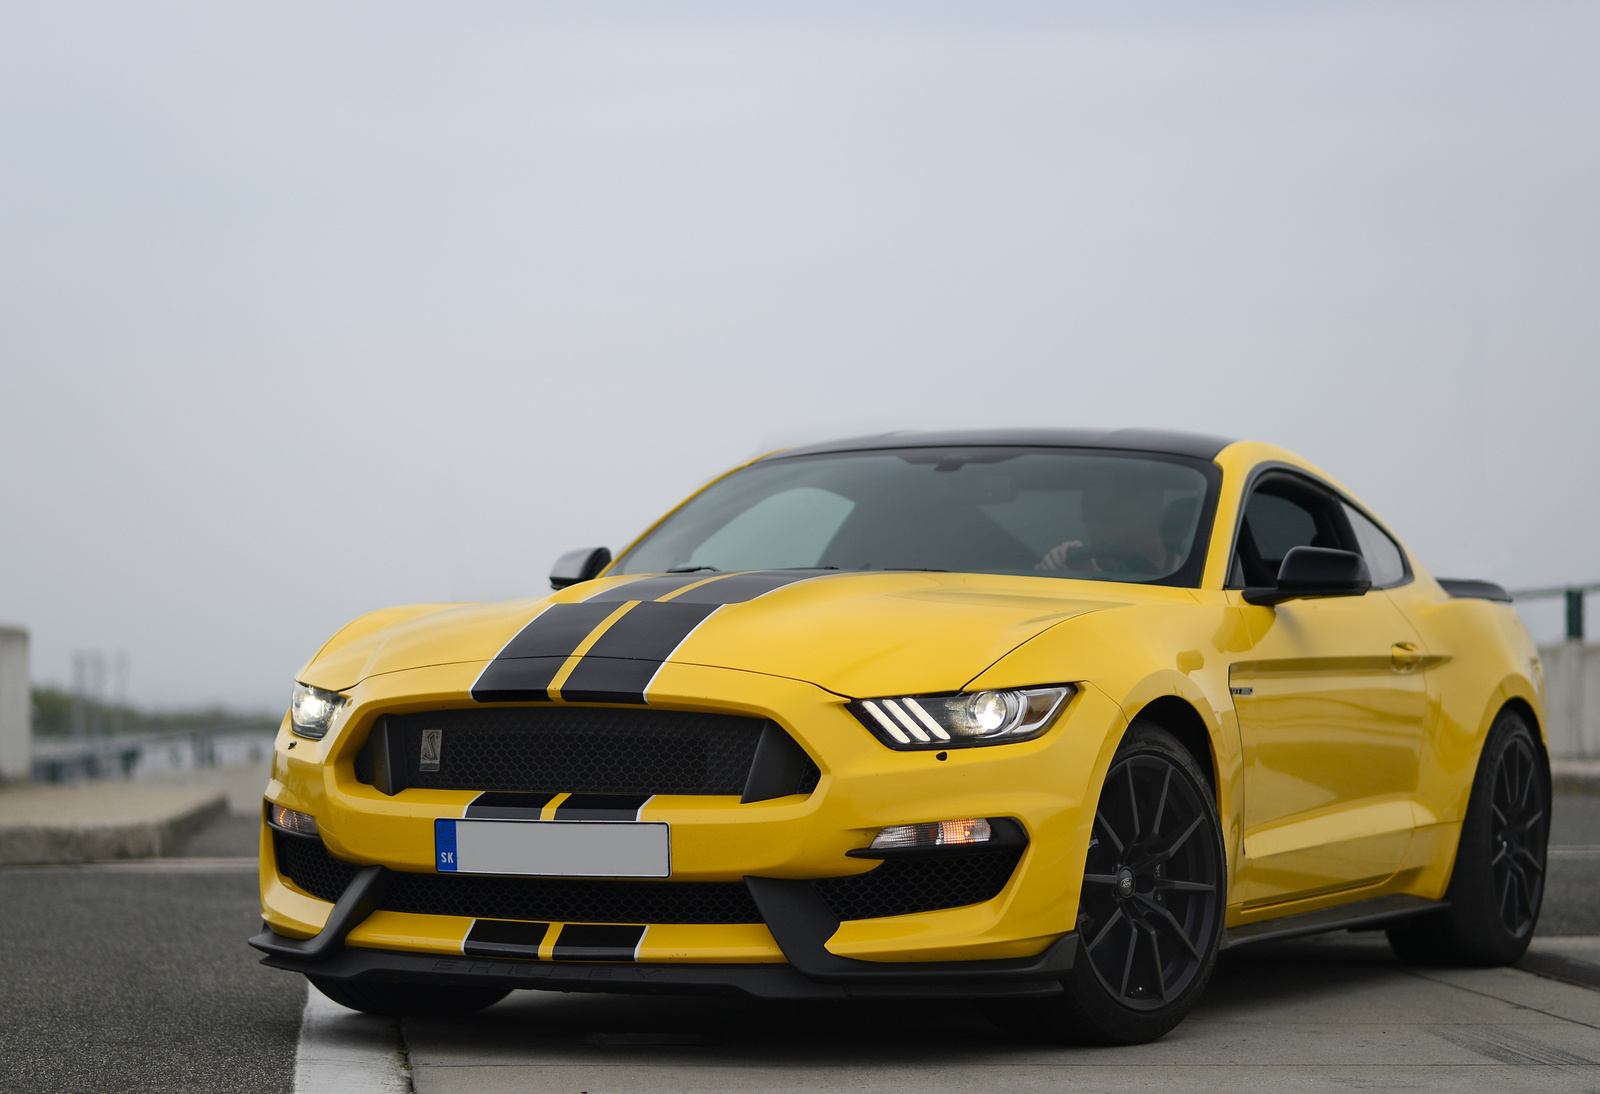 Shelby GT 350